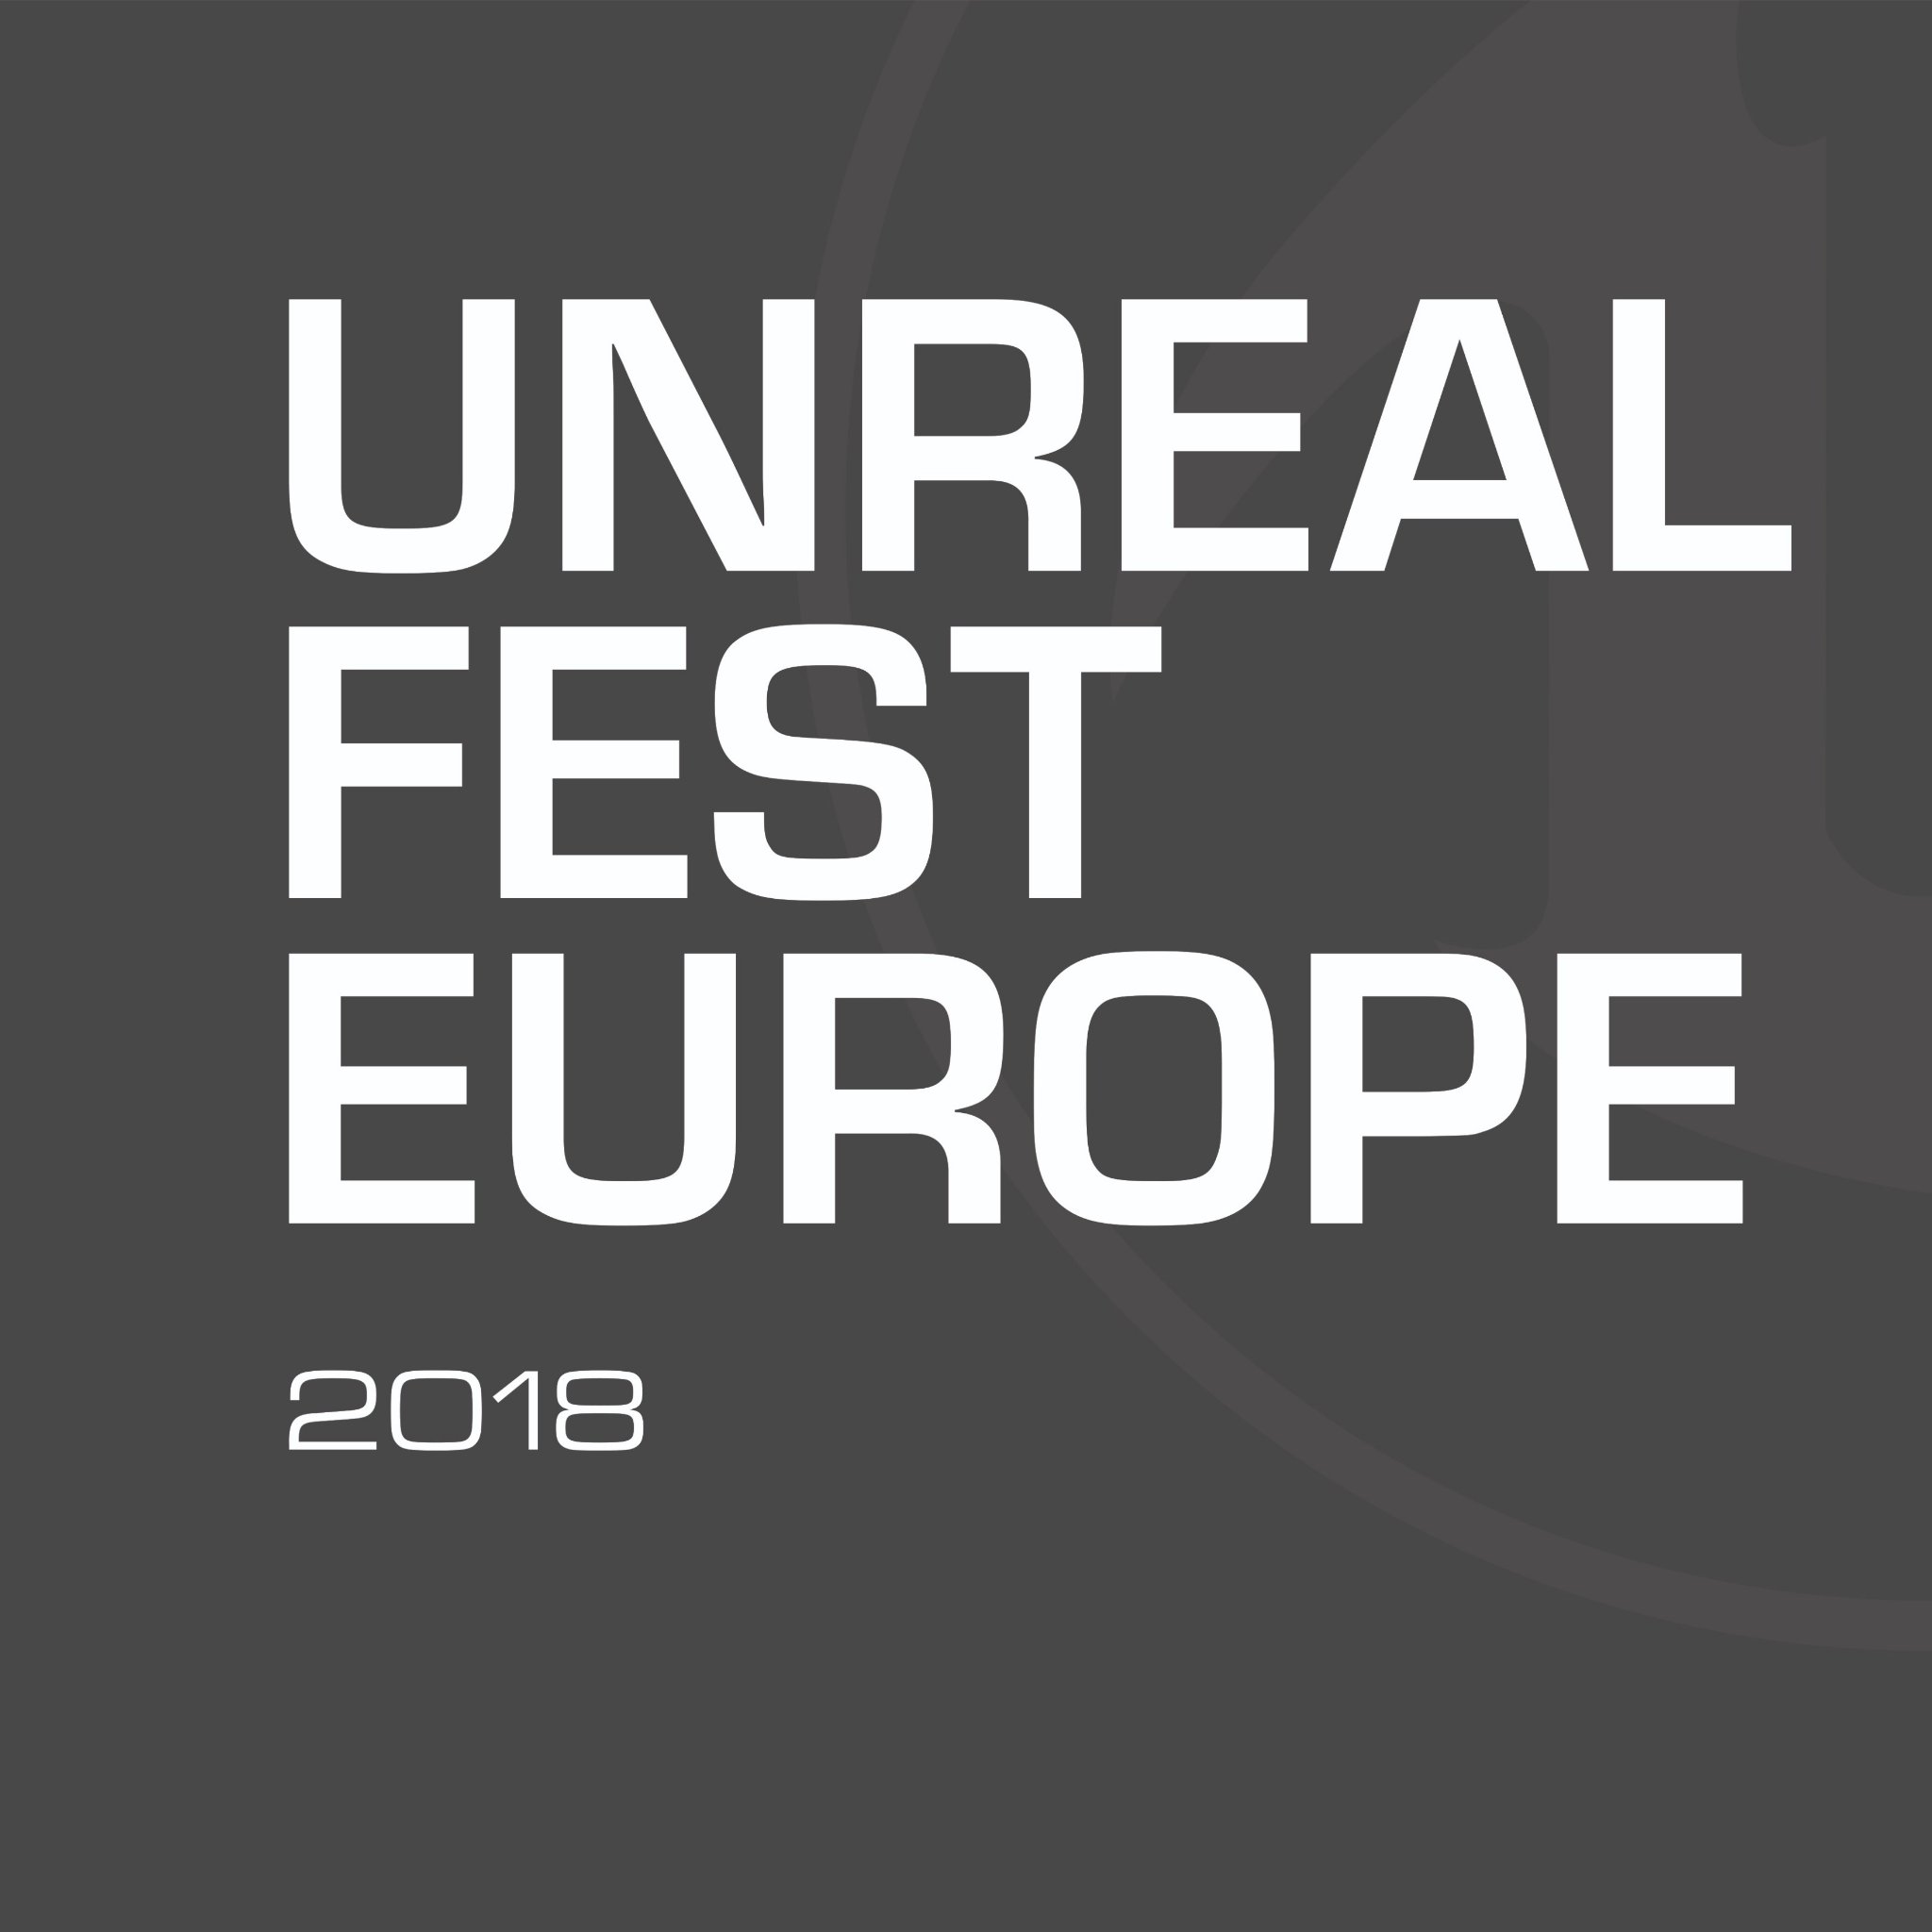 Unreal Fest Europe brings together game developers to learn, inspire and network with each other. Join us April 10-12, 2019 in Prague.